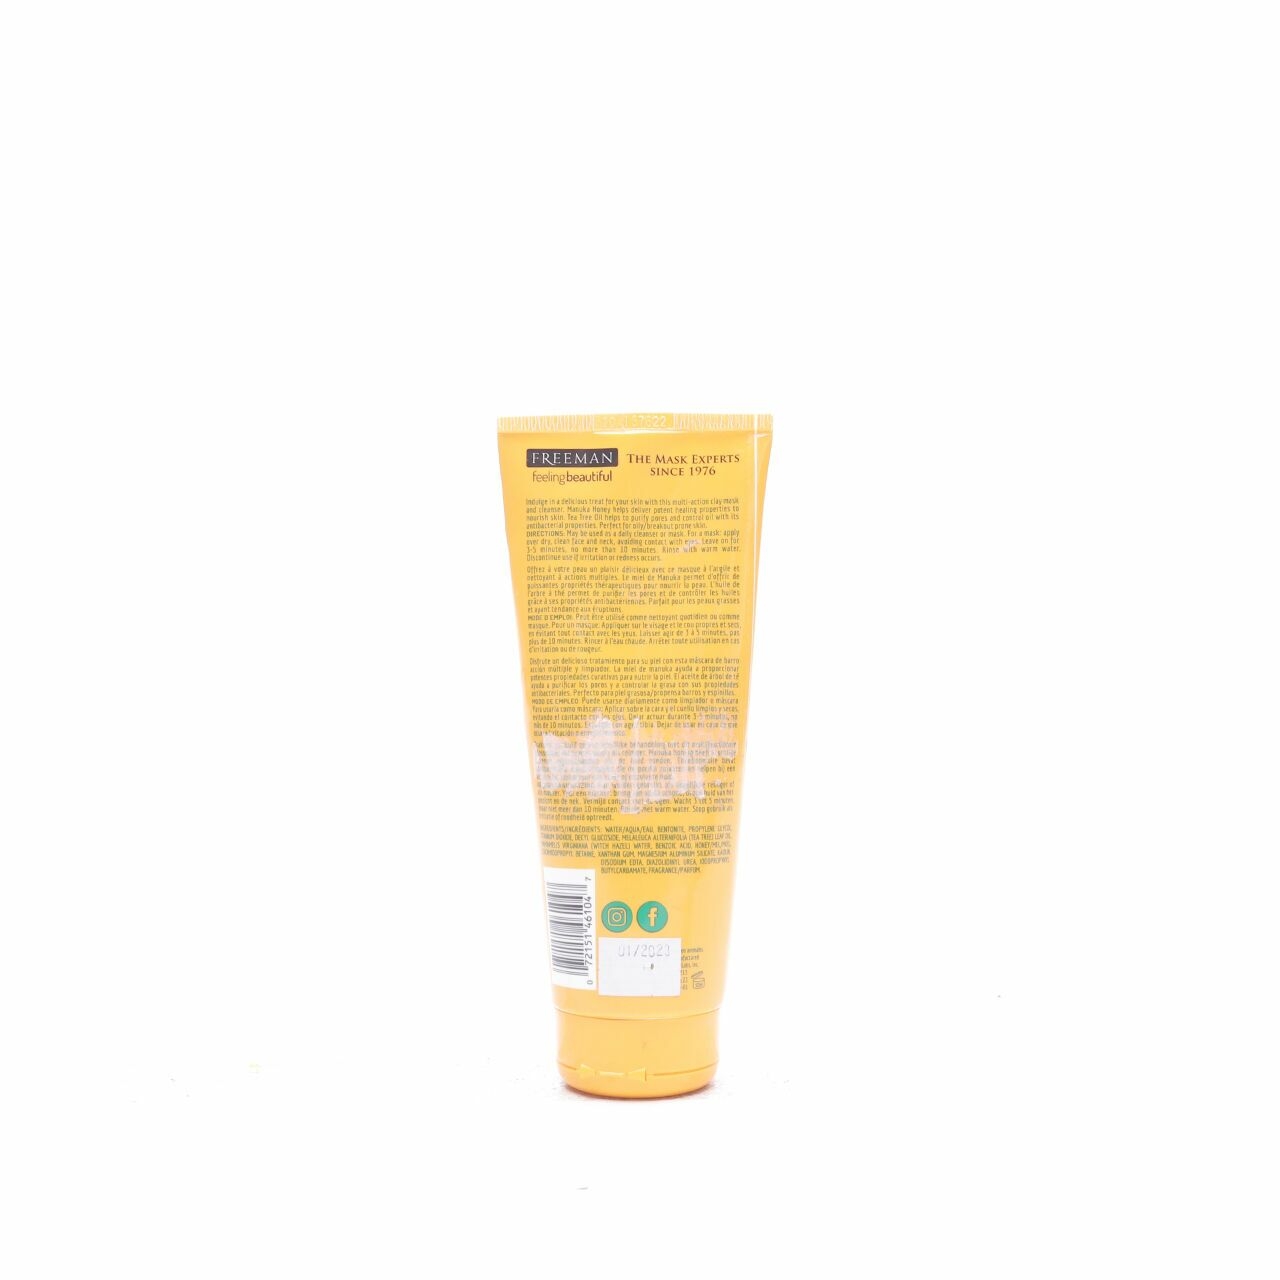 Freeman Deep Clearing Clay Mask + Cleanser Skin Care